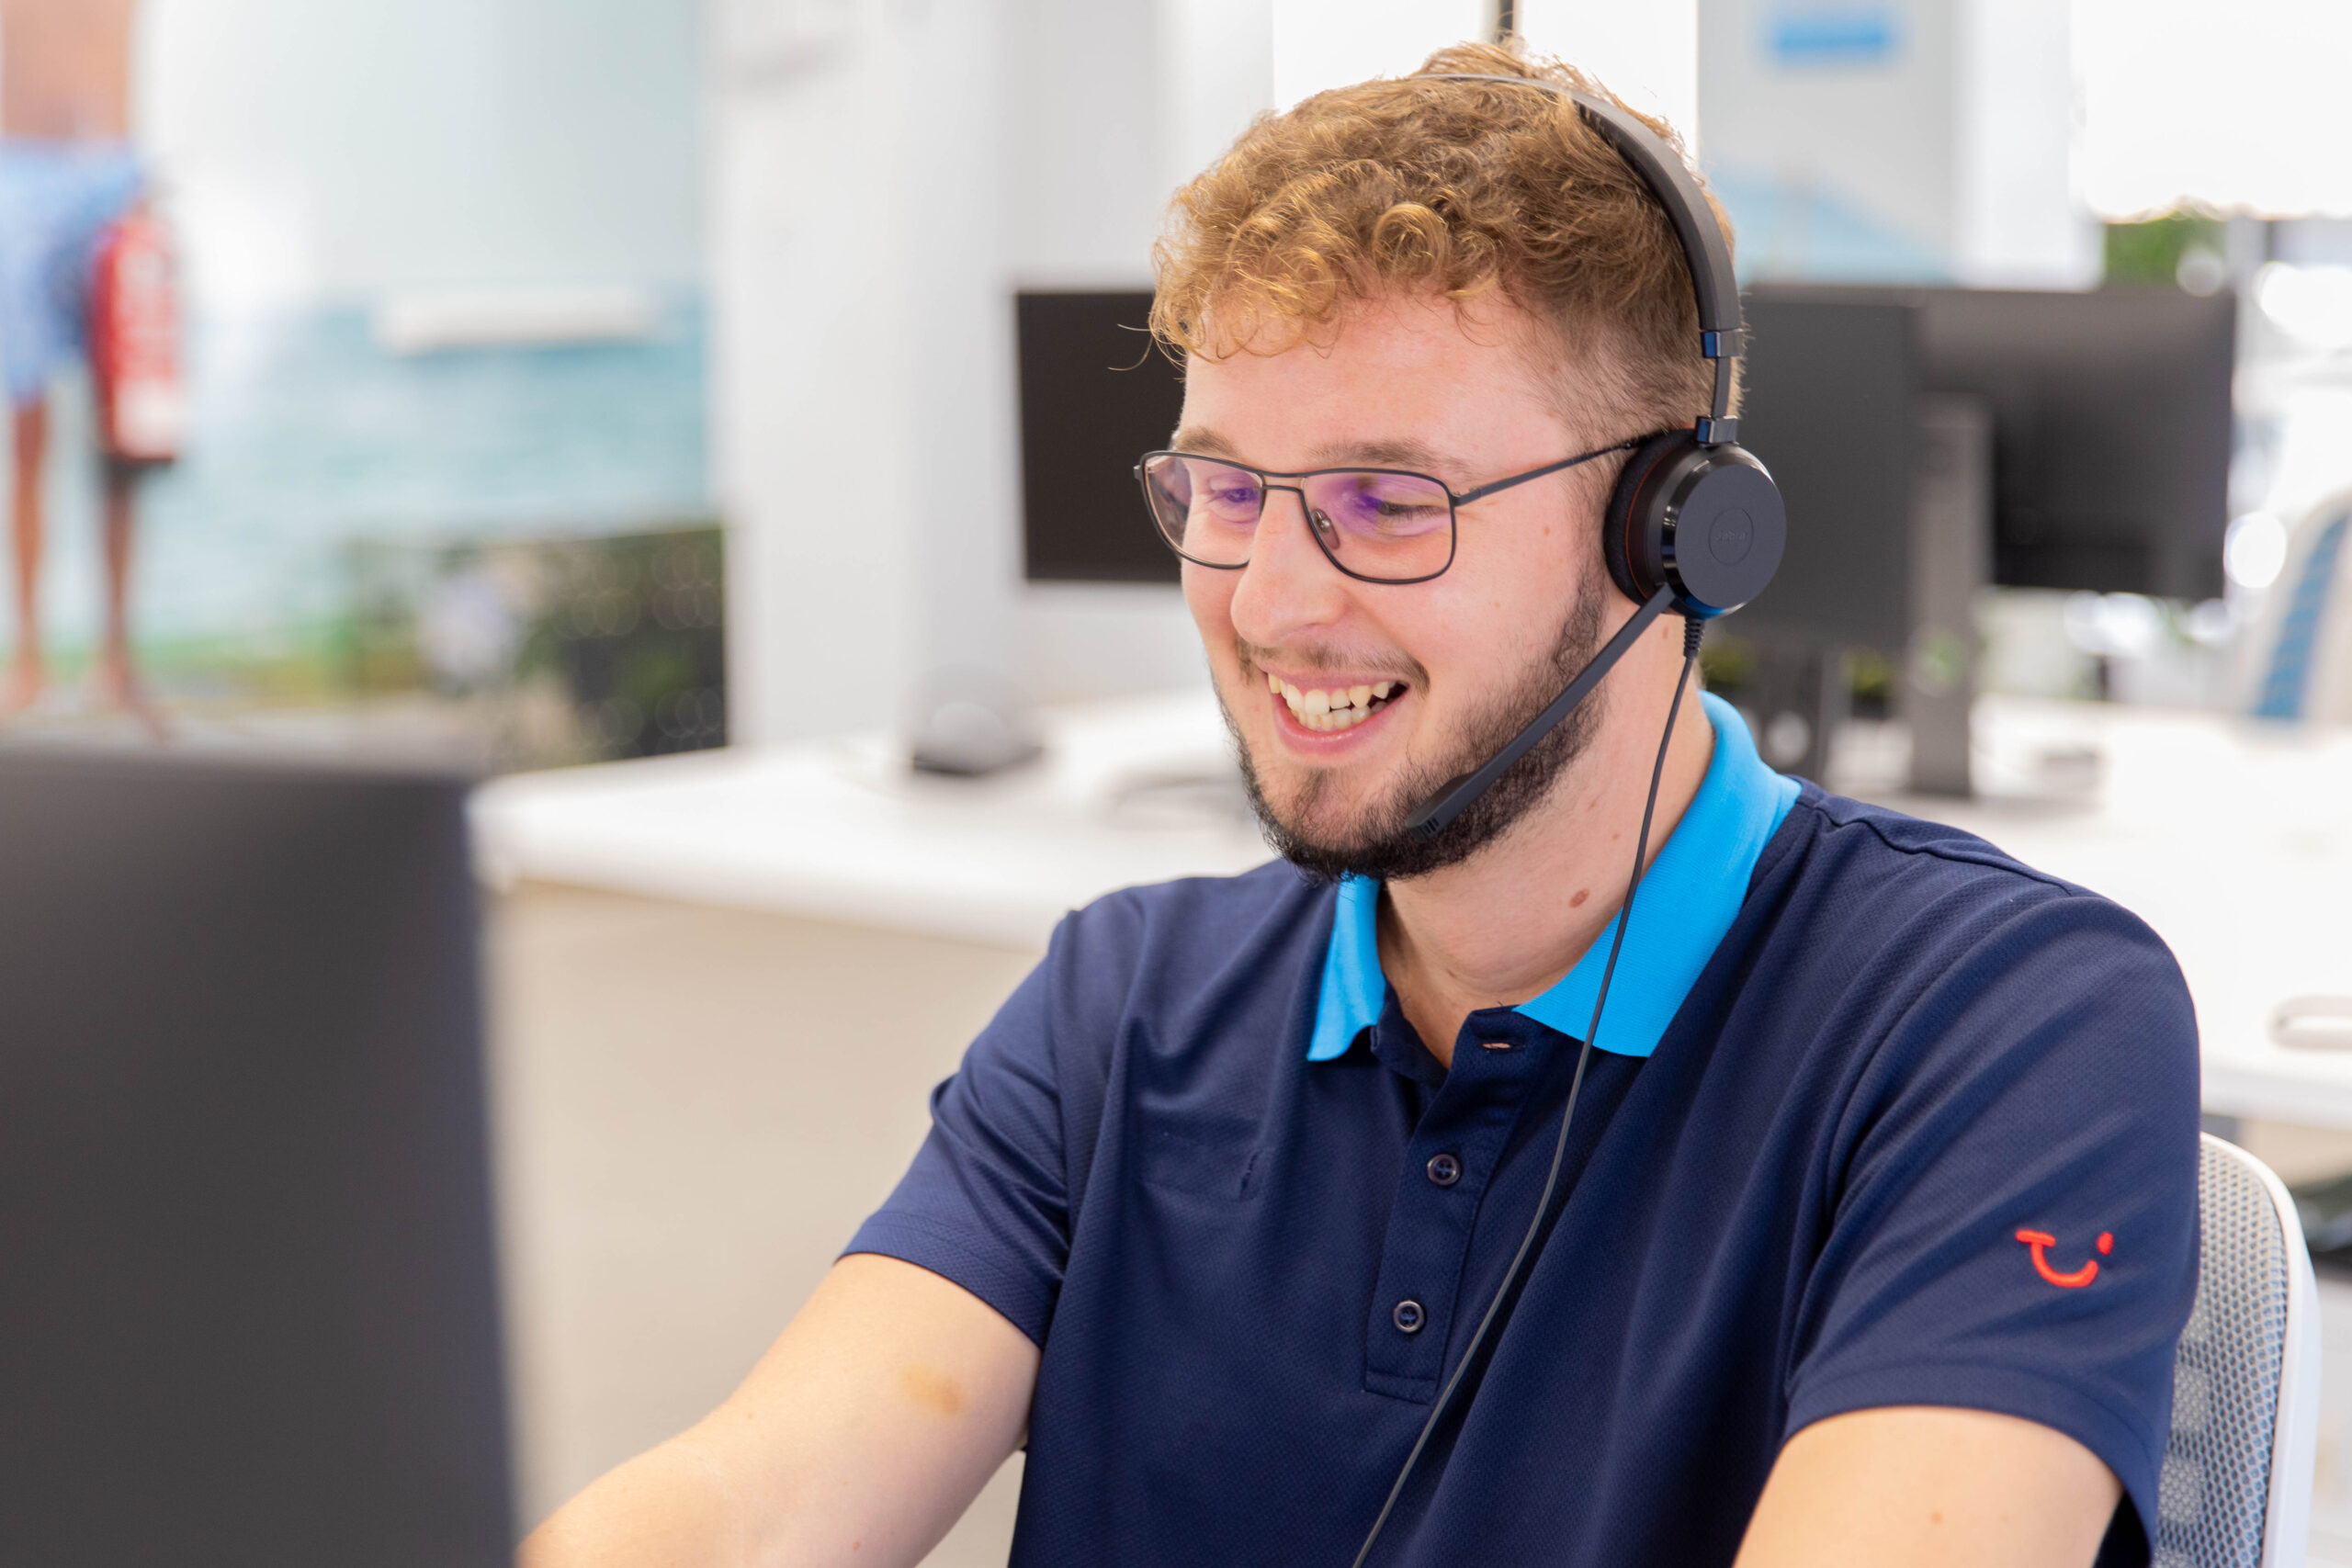 A contact centre employee is smiling at the screen answering calls from a customer. The colleague has glasses and short hair with the office in the background.